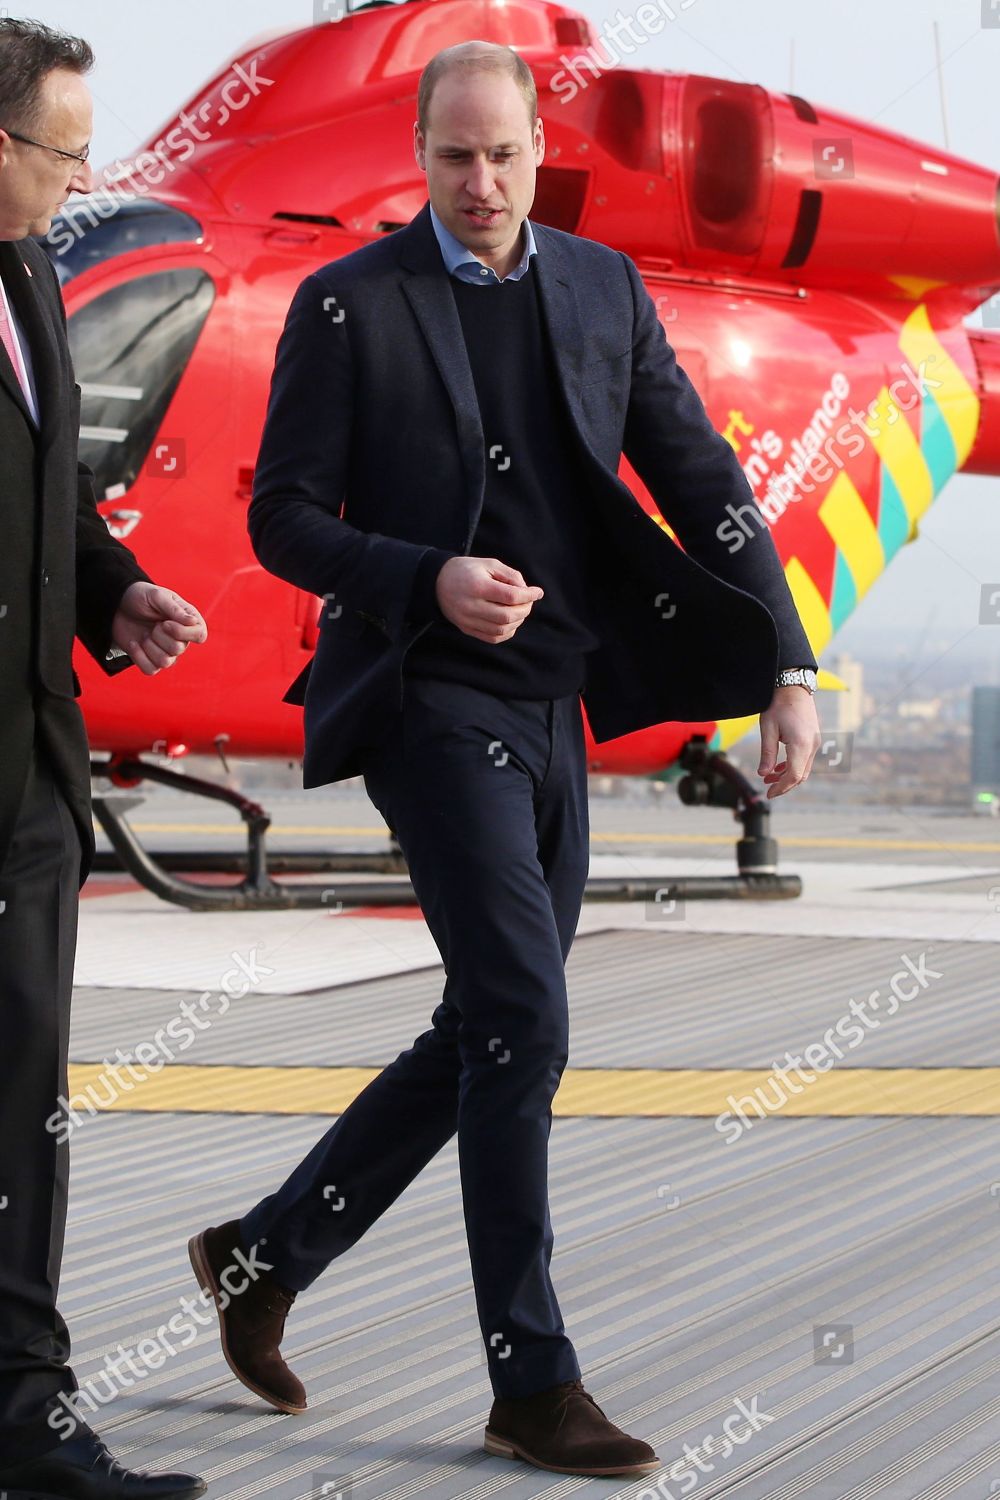 prince-william-arrives-at-the-royal-london-hospital-aboard-an-air-ambulance-uk-shutterstock-editorial-10052351i.jpg